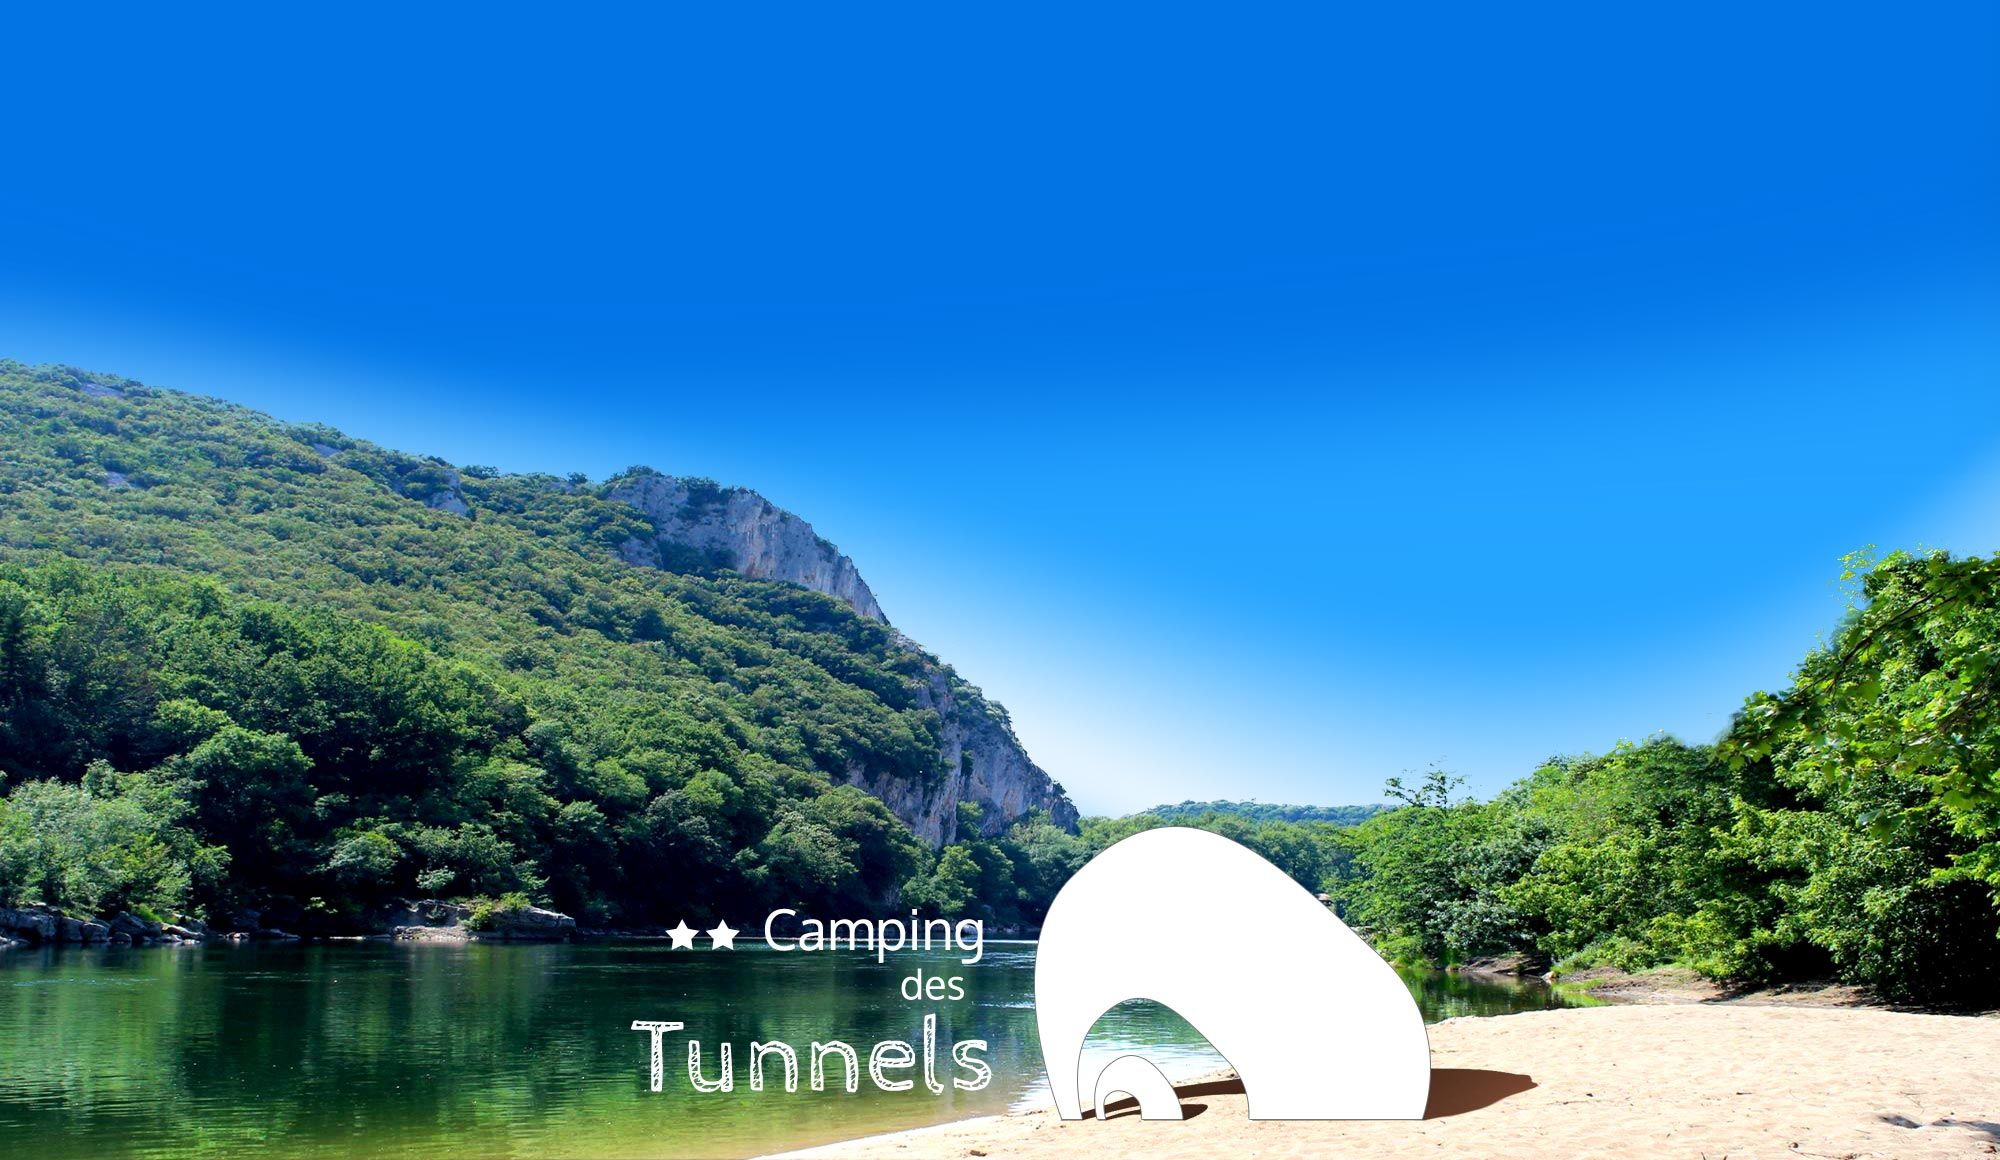 Camping des Tunnels